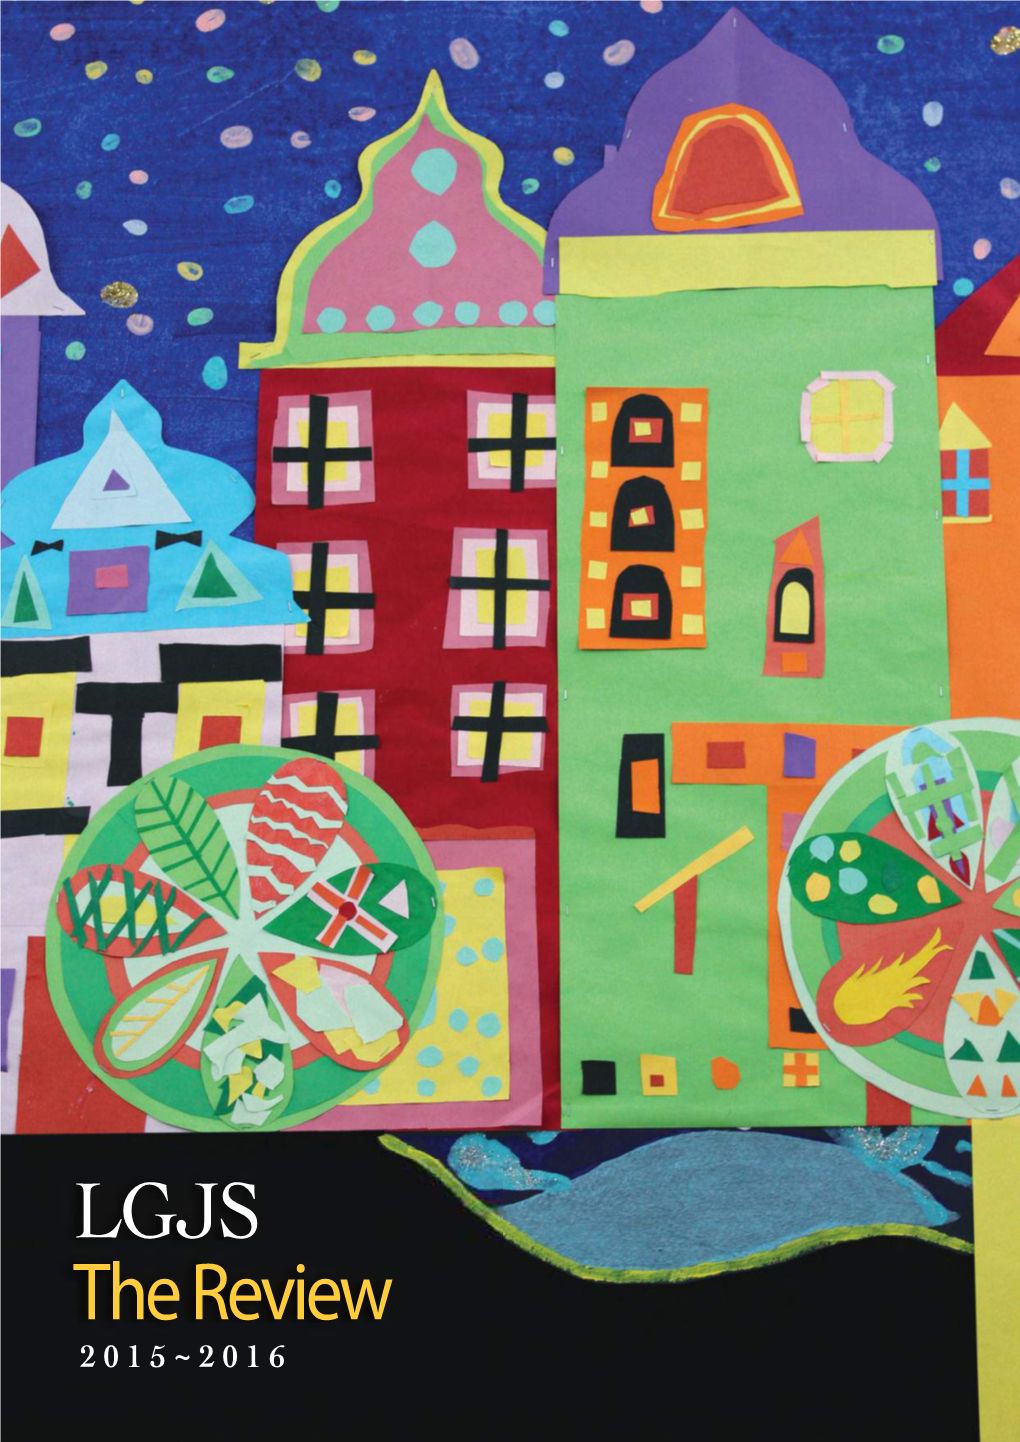 LGJS the Review 2 0 1 5 ~ 2 0 1 6 Leicester�Grammar�School�2016�ADAM Layout�1��30/08/2016��11:06��Page�2